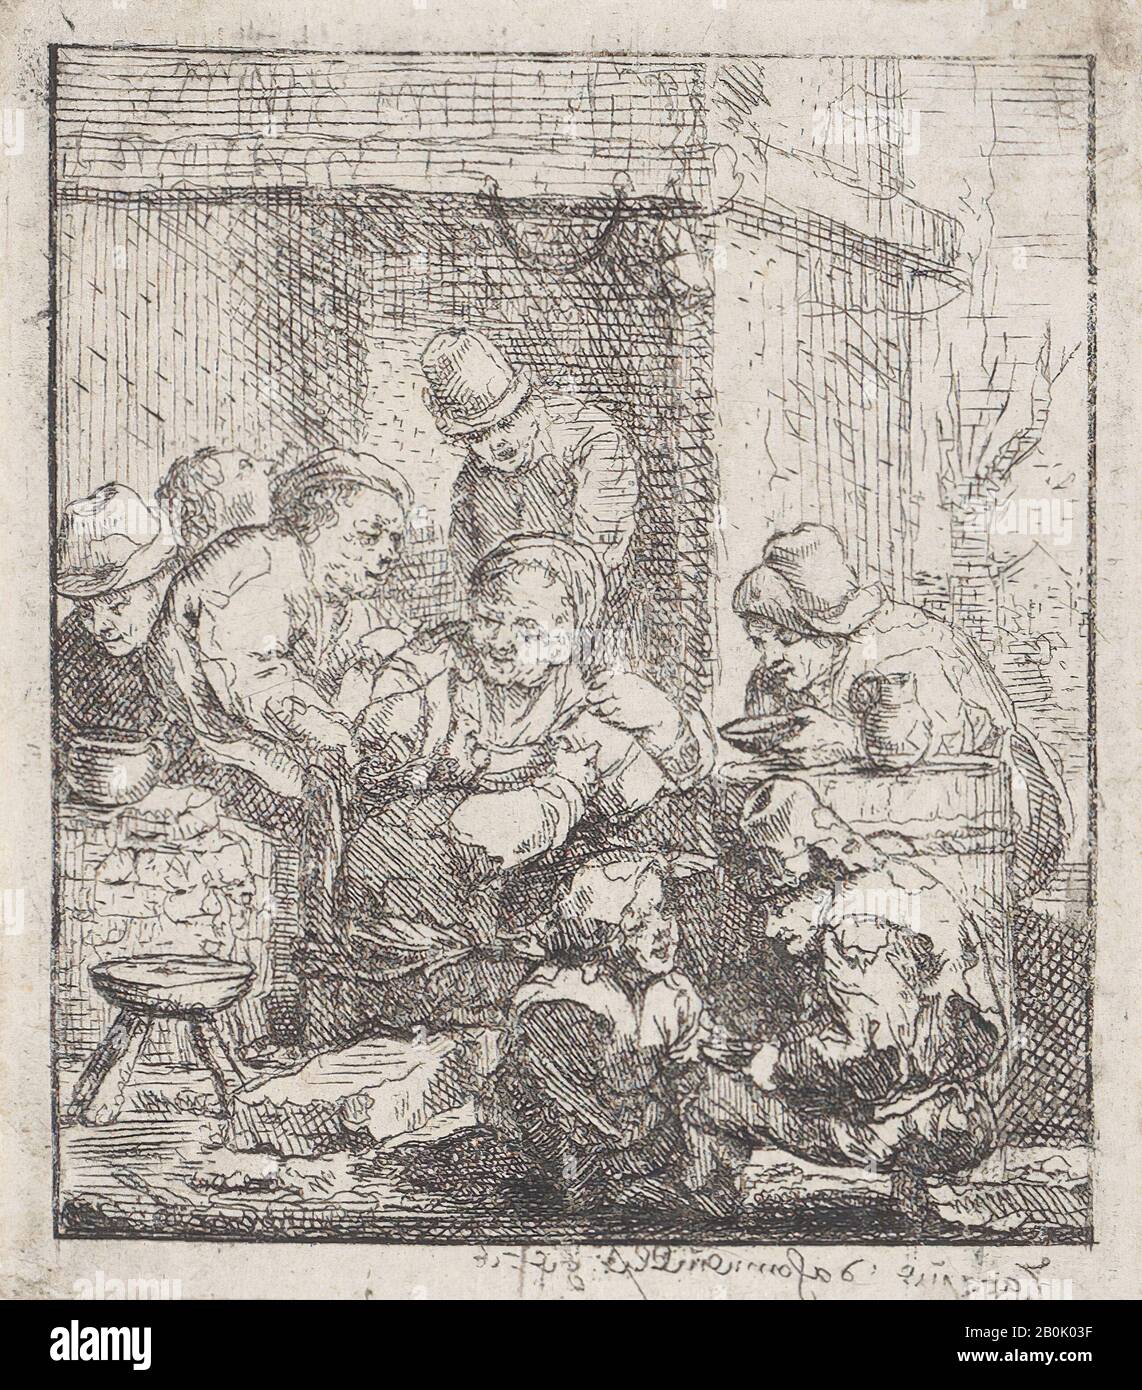 Jacques Dassonville, Dispute over a jug of beer, Jacques Dassonville (French, ca. 1619–ca. 1670), ca. 1640–70, Etching, Sheet (Trimmed): 2 11/16 × 2 3/8 in. (6.9 × 6.1 cm), Prints Stock Photo